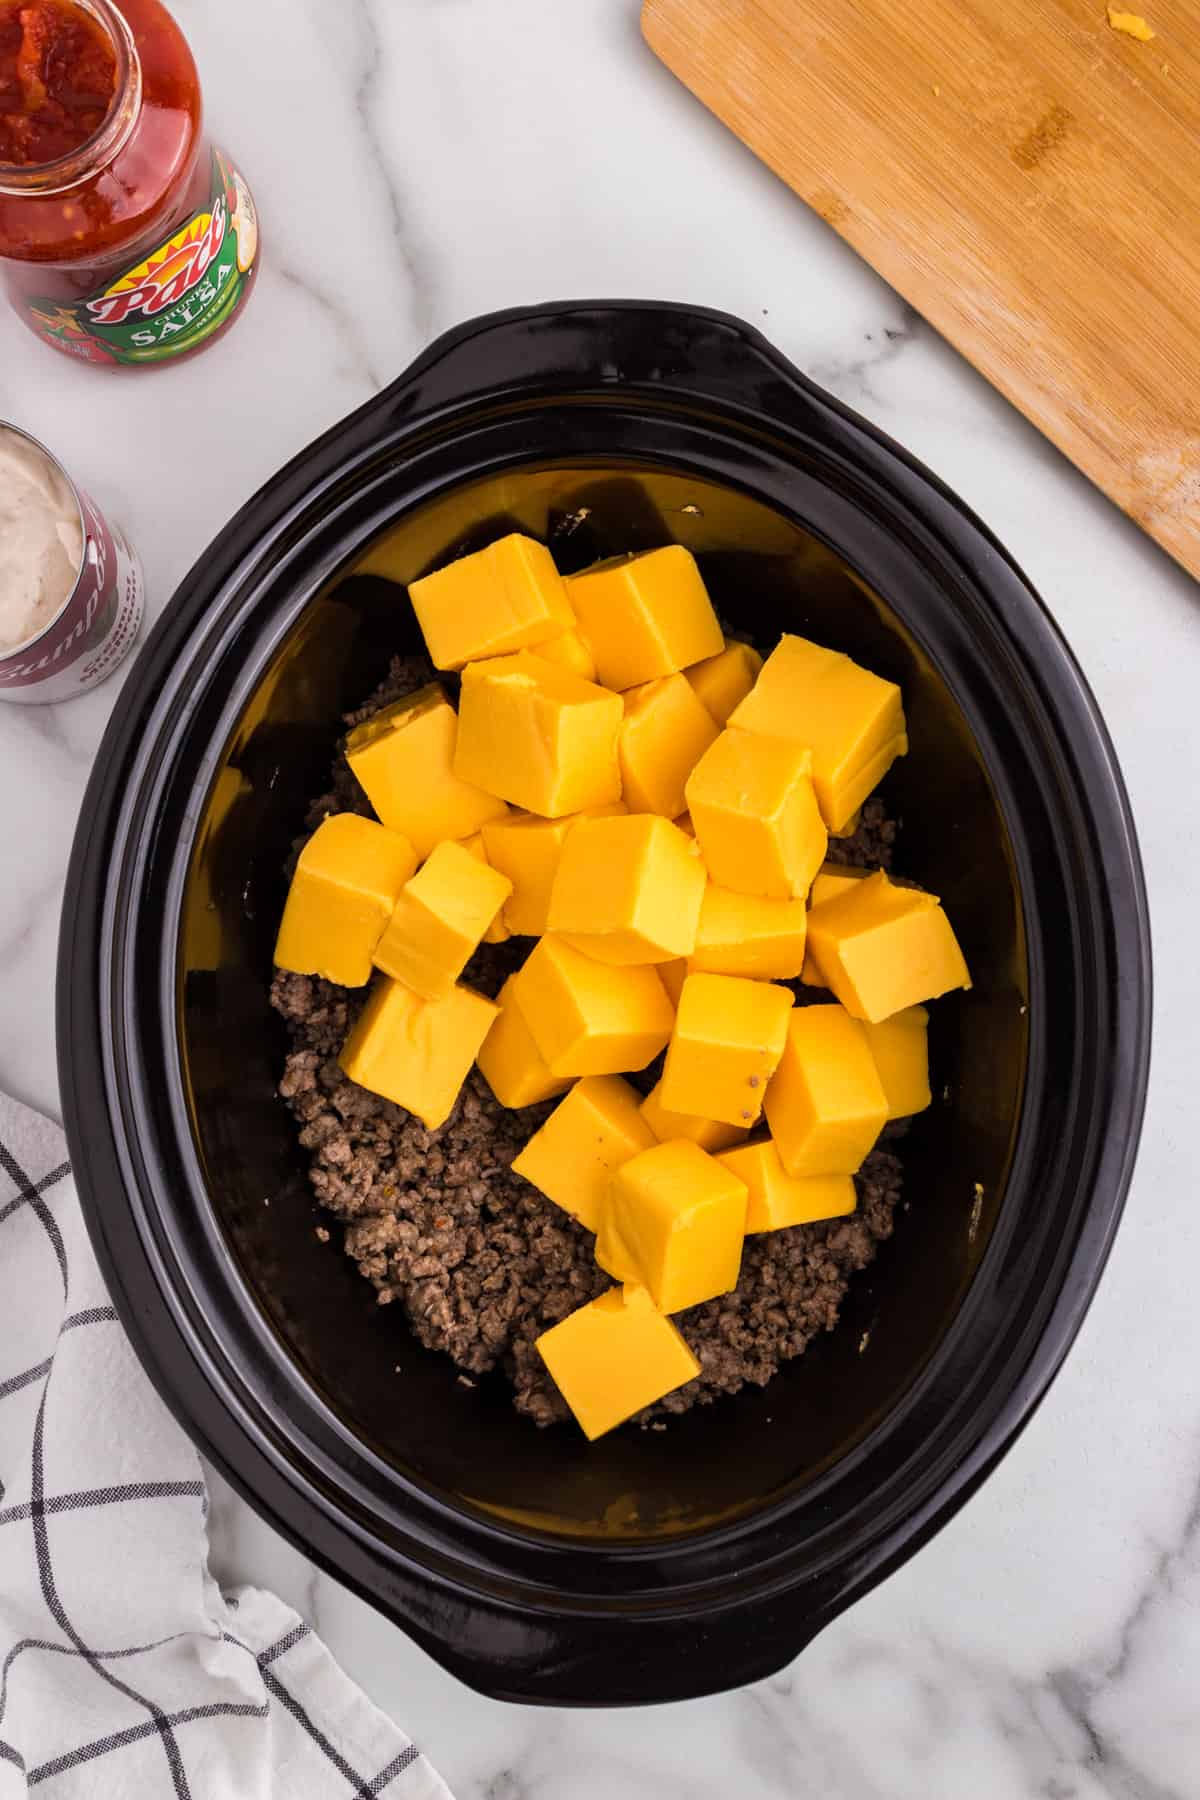 Browned meat and cubed Velveeta cheese in crock pot for Hamburger Cheese Dip